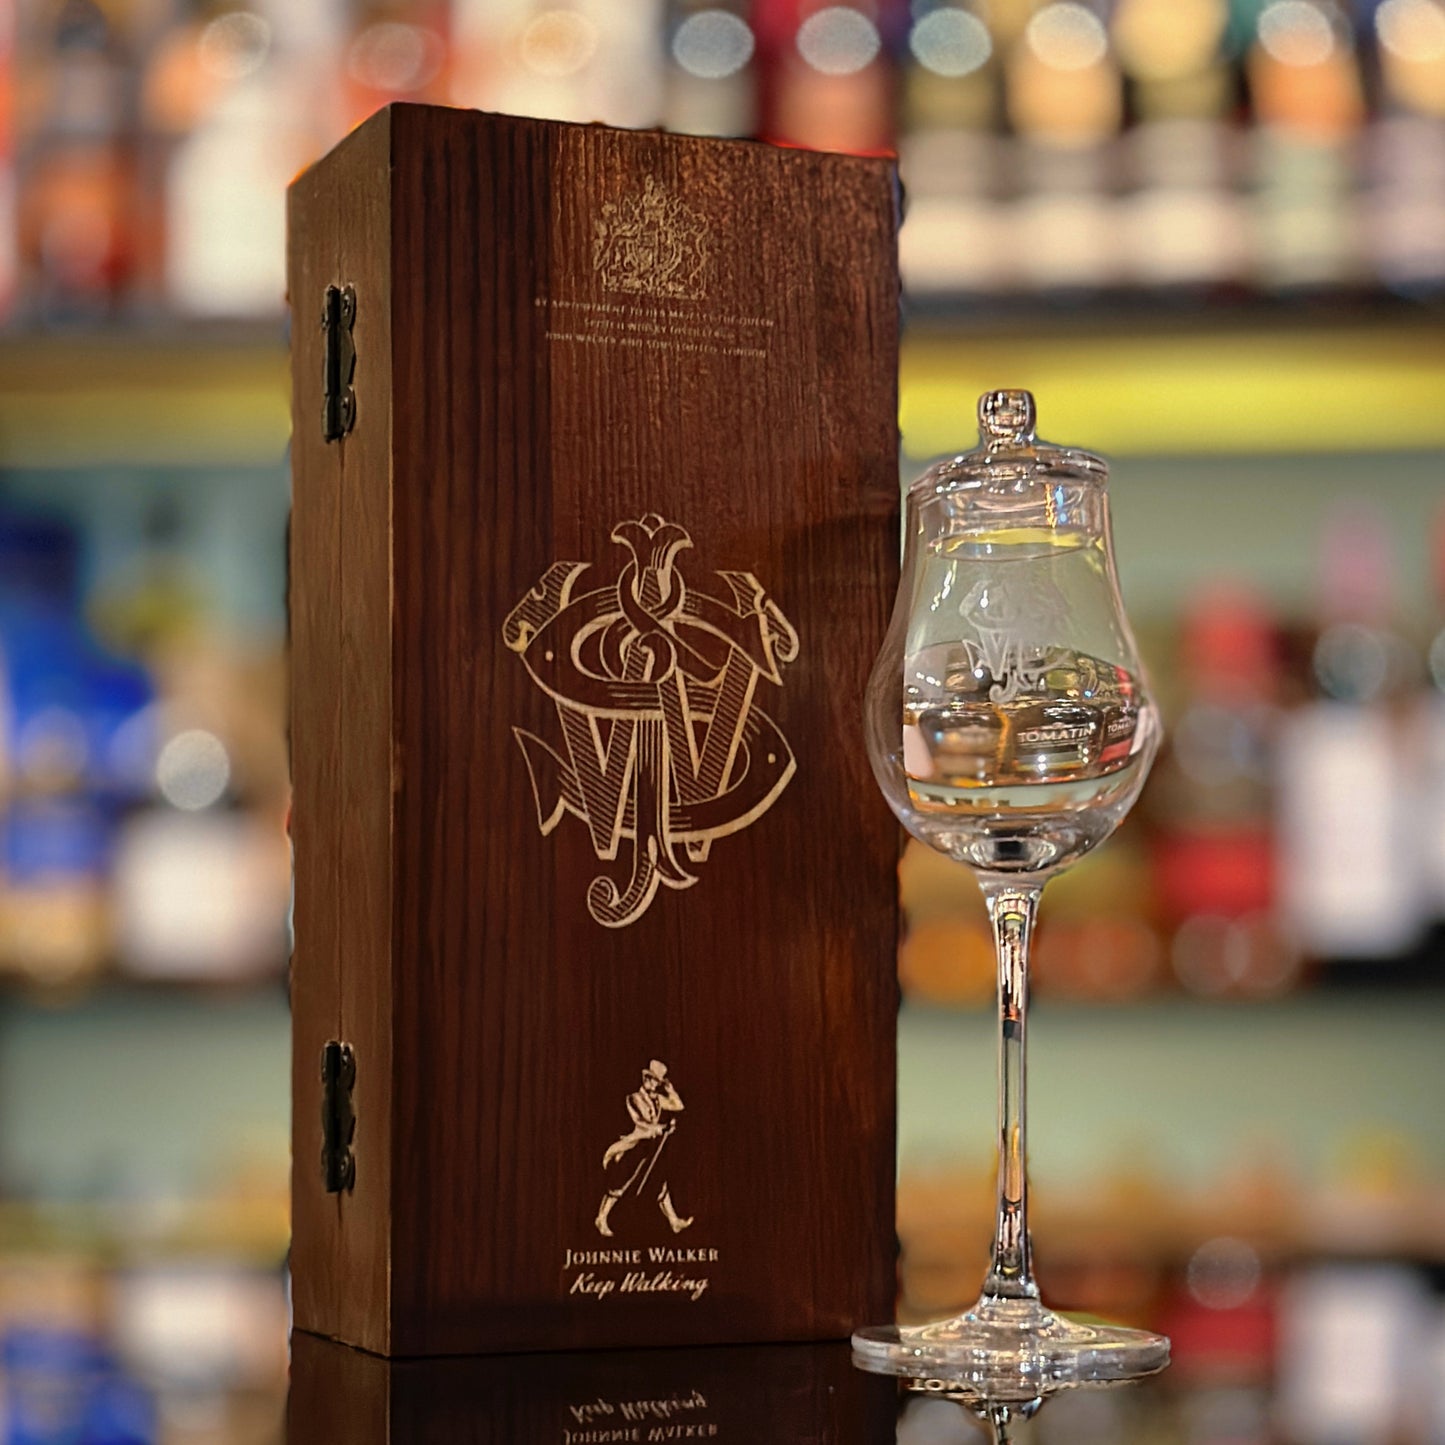 John Walker & Sons XR21 Blended Scotch Whisky (with Nosing Glass)